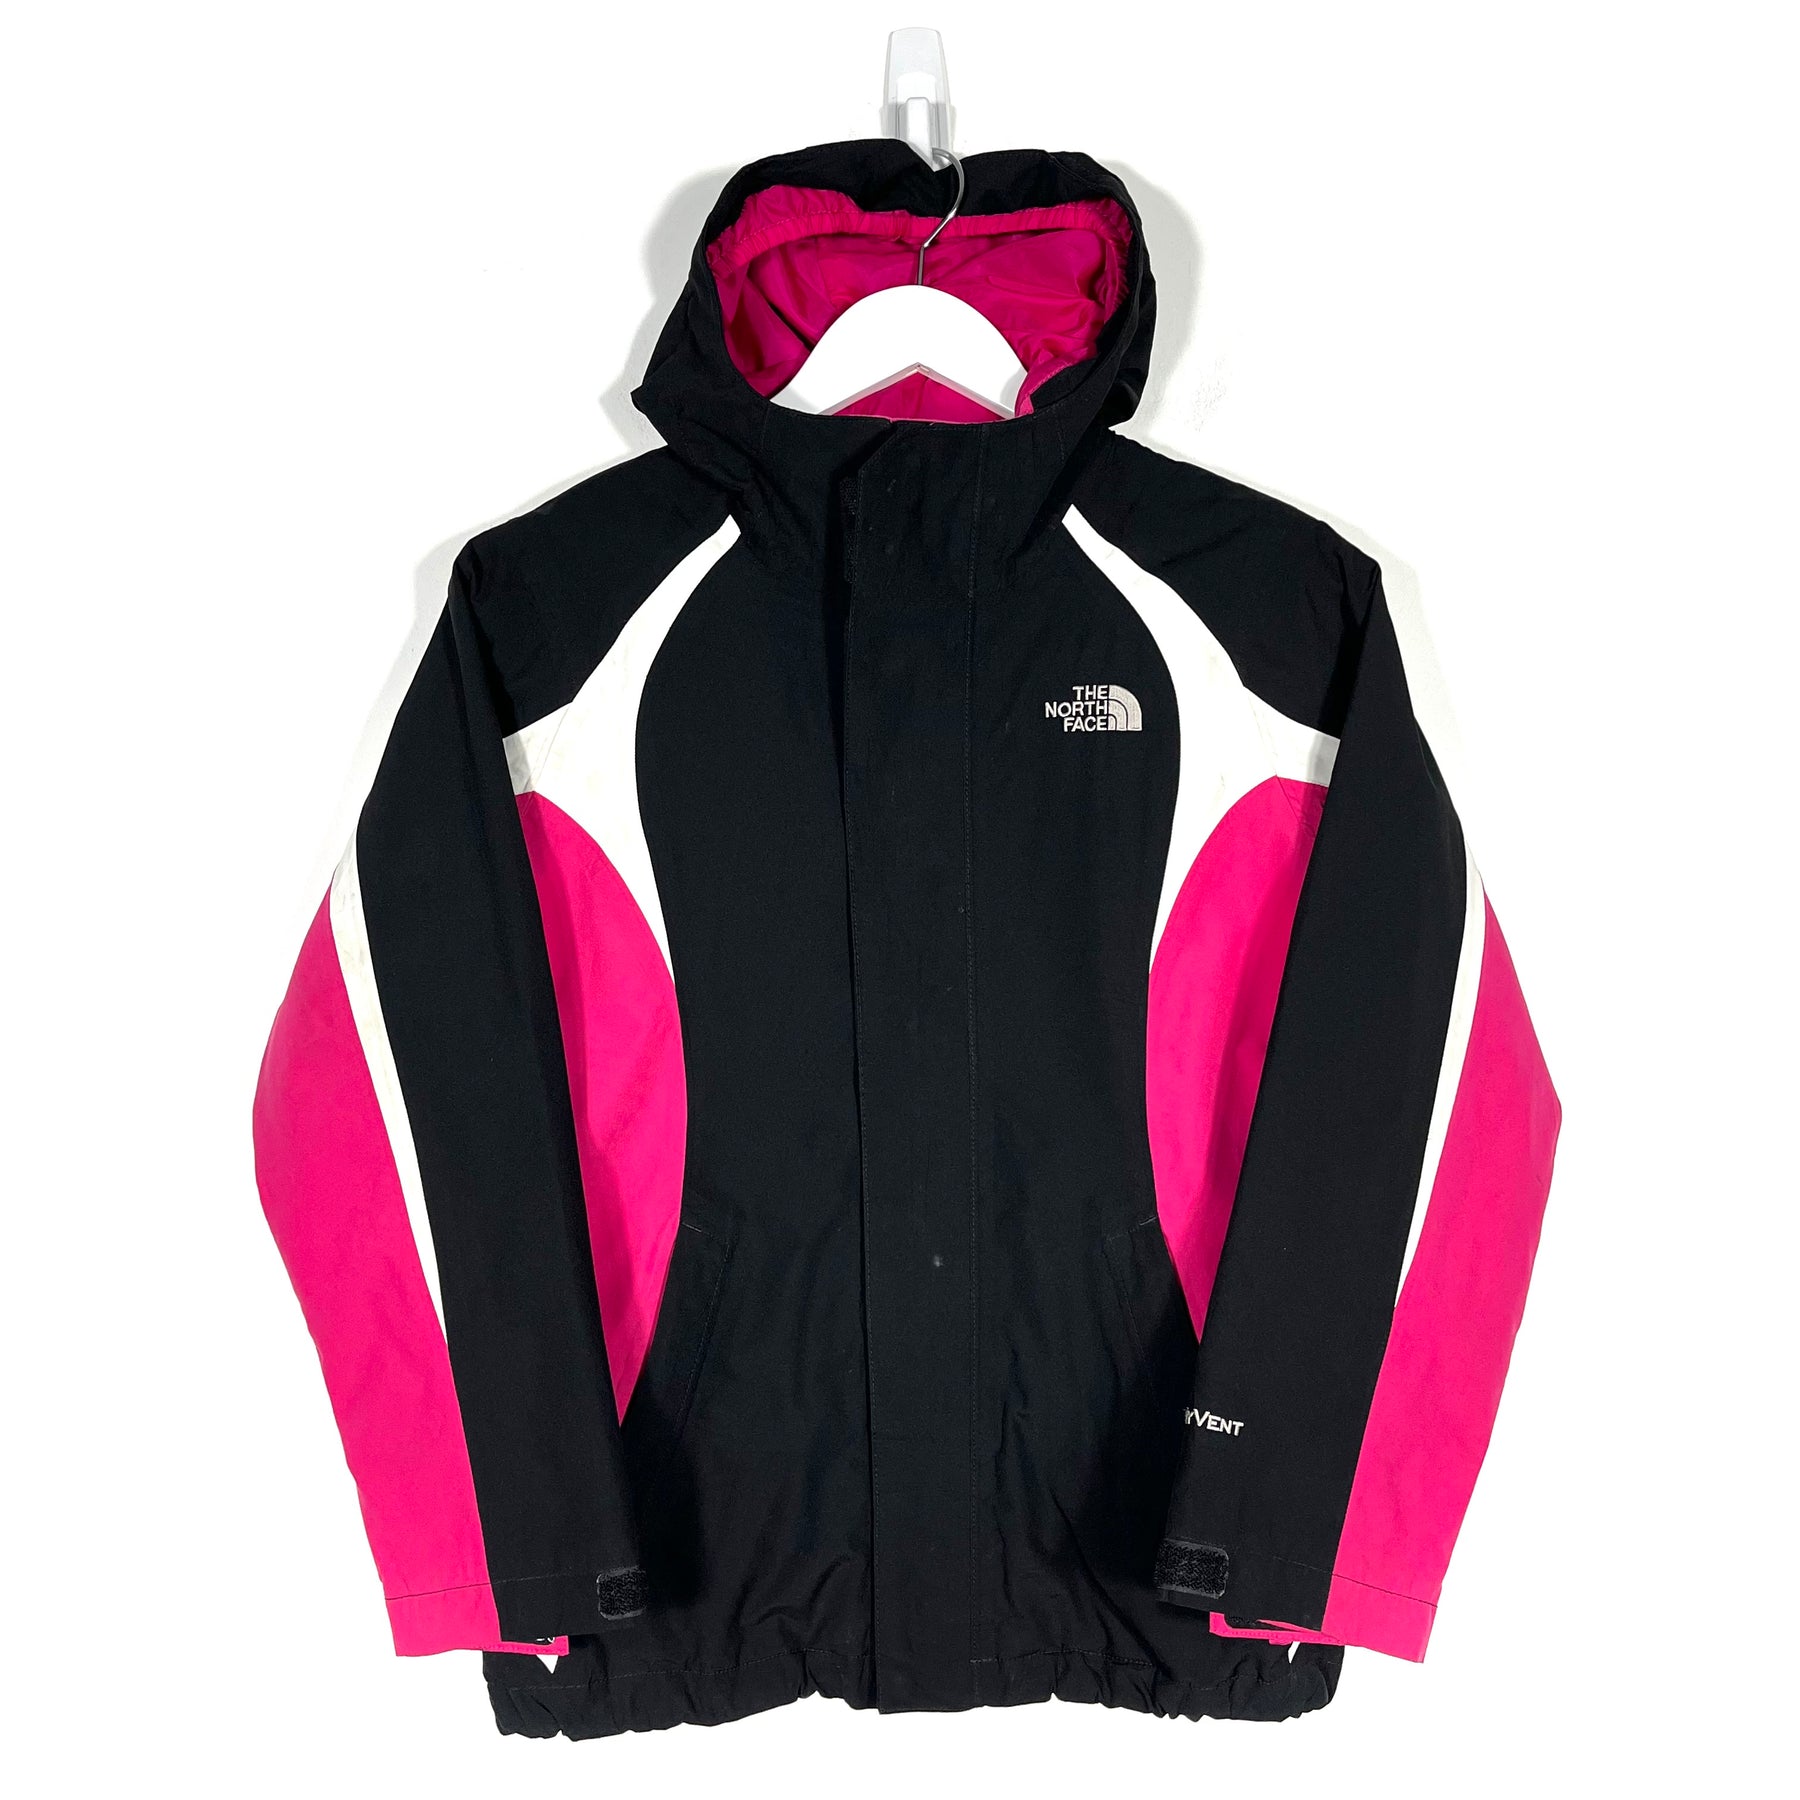 The North Face HyVent Lightweight Jacket  - Women's Small